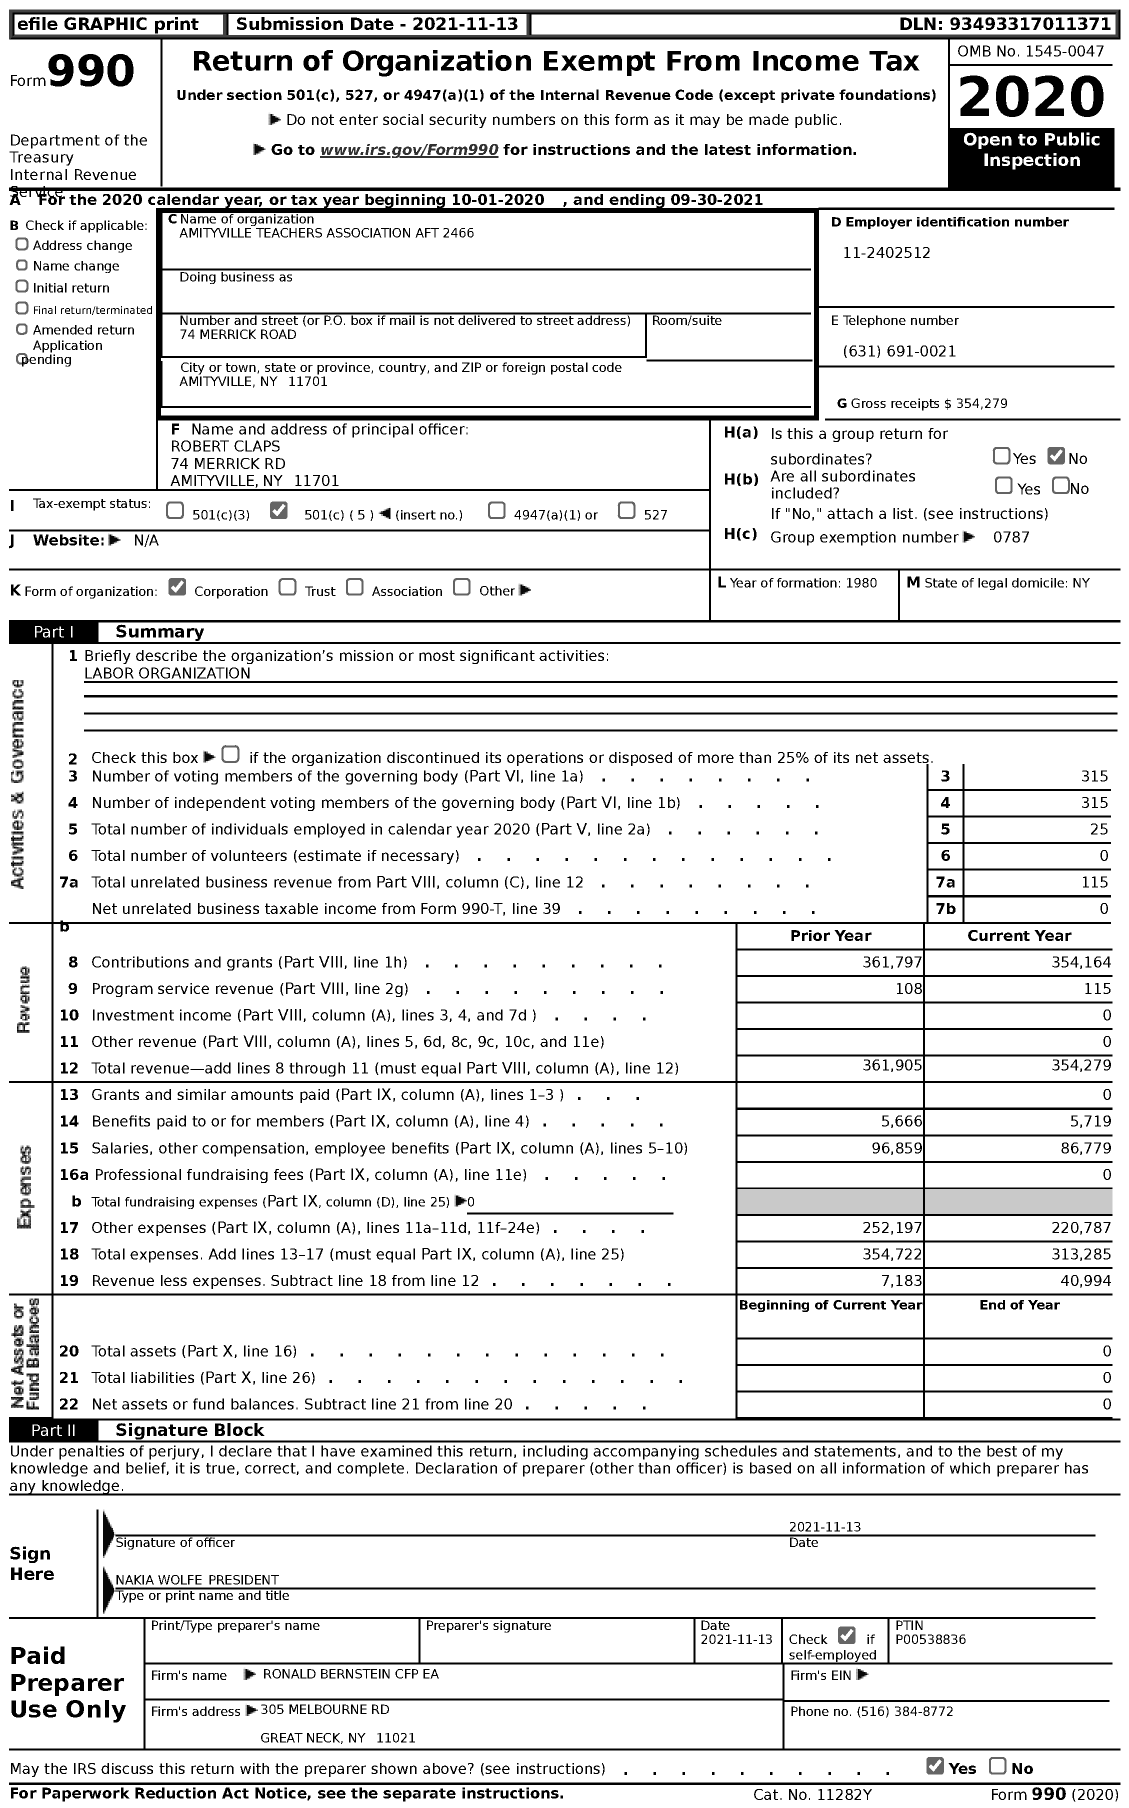 Image of first page of 2020 Form 990 for American Federation of Teachers - 2466 Amityville Teachers Associatio